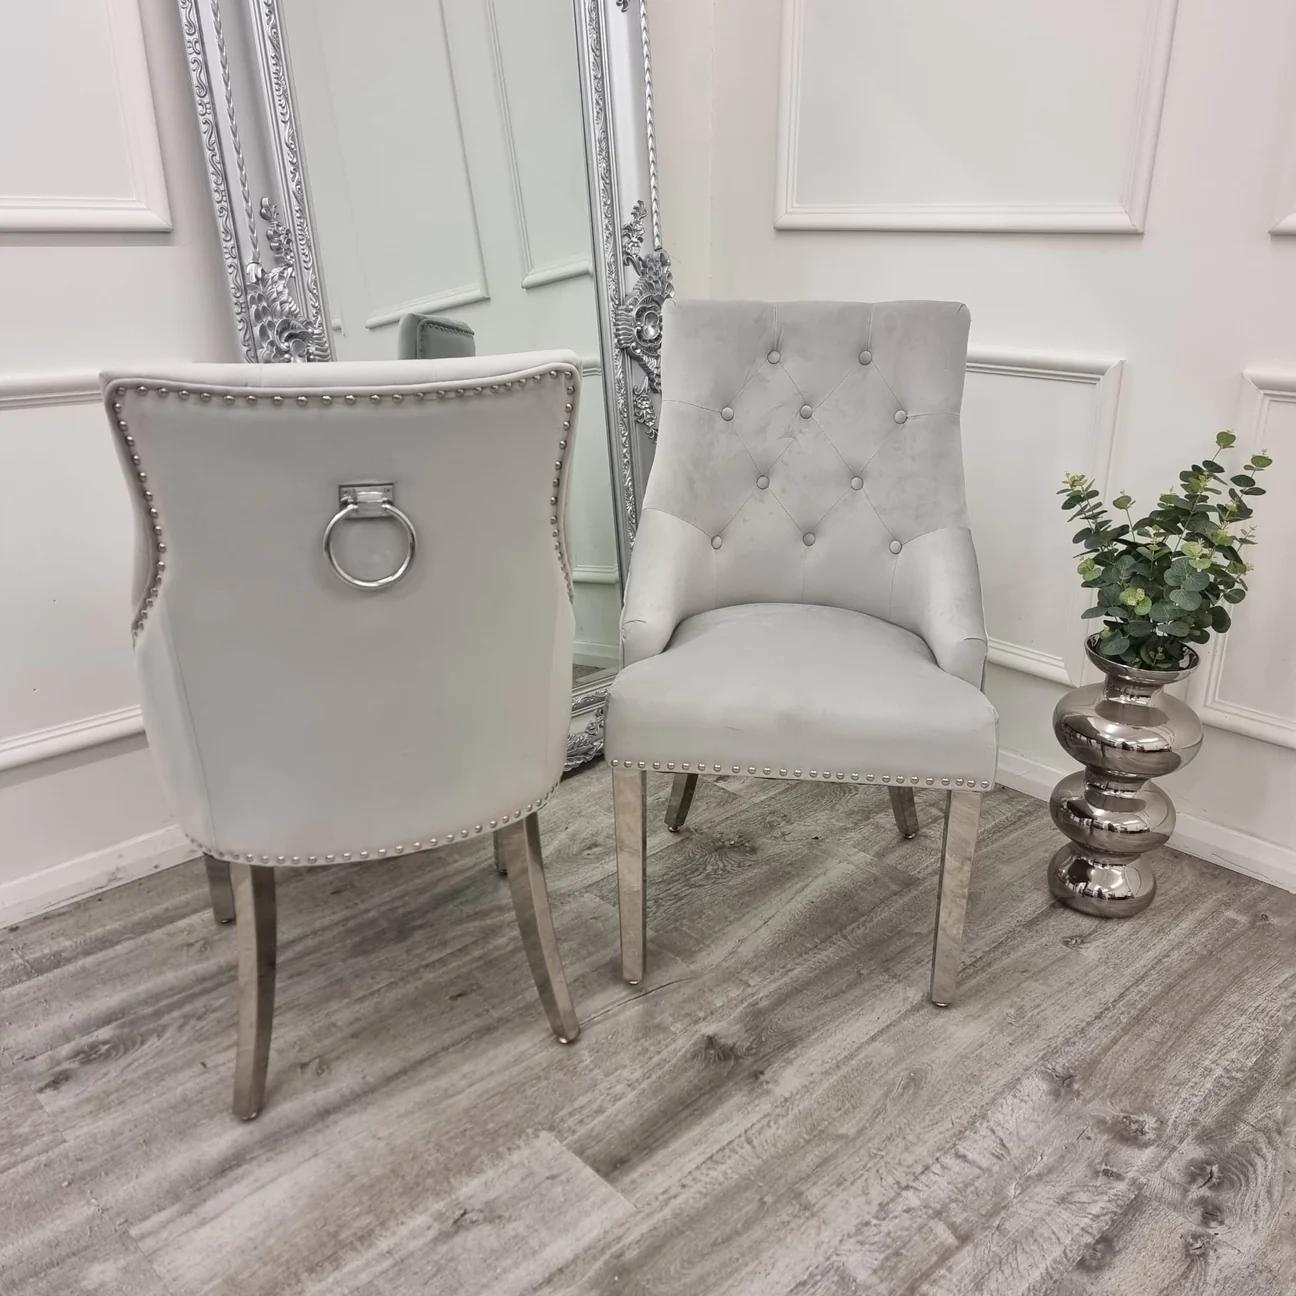 1.5 Louis White Marble Light Grey Chairs - Mirror4you